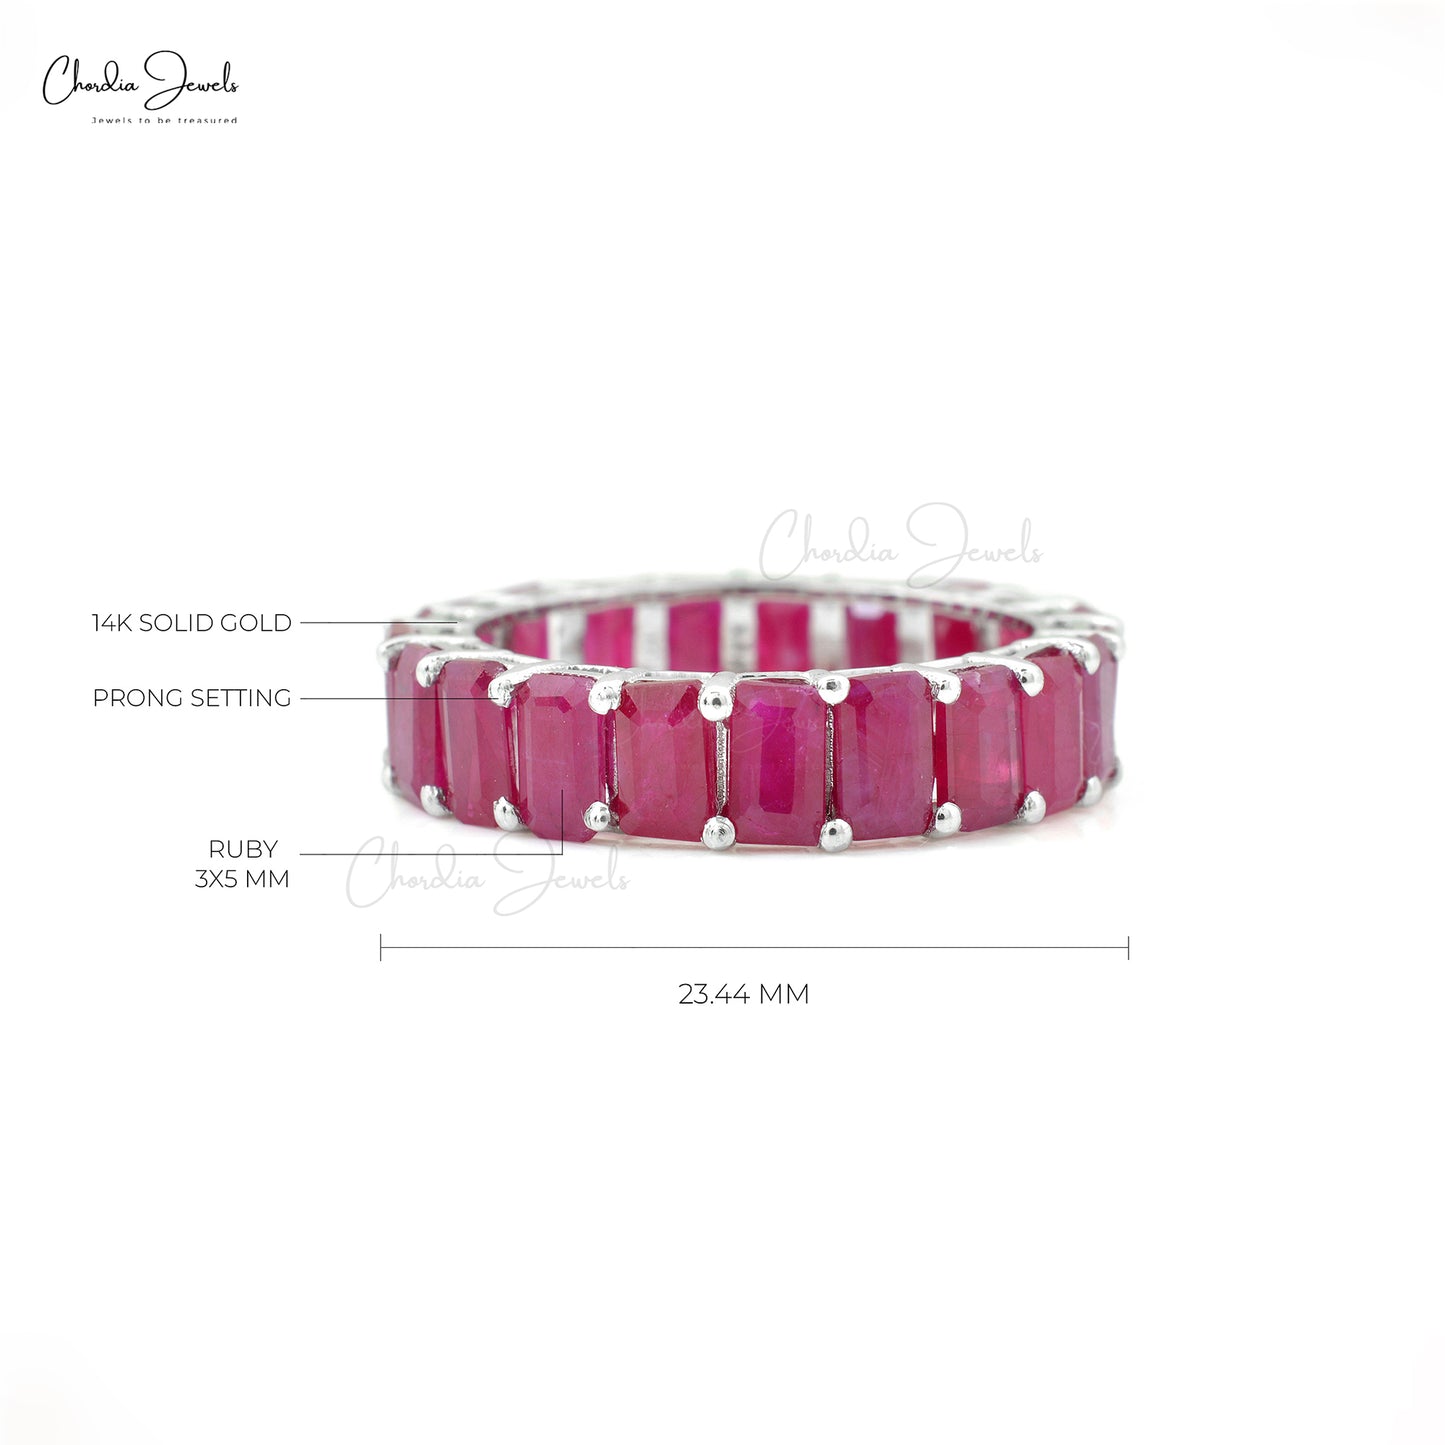 Red Ruby Dainty Eternity Band 5x3mm Octagon Natural Gemstone 14k Solid White Gold Ring 4.94Ct July Birthstone Jewelry For Women